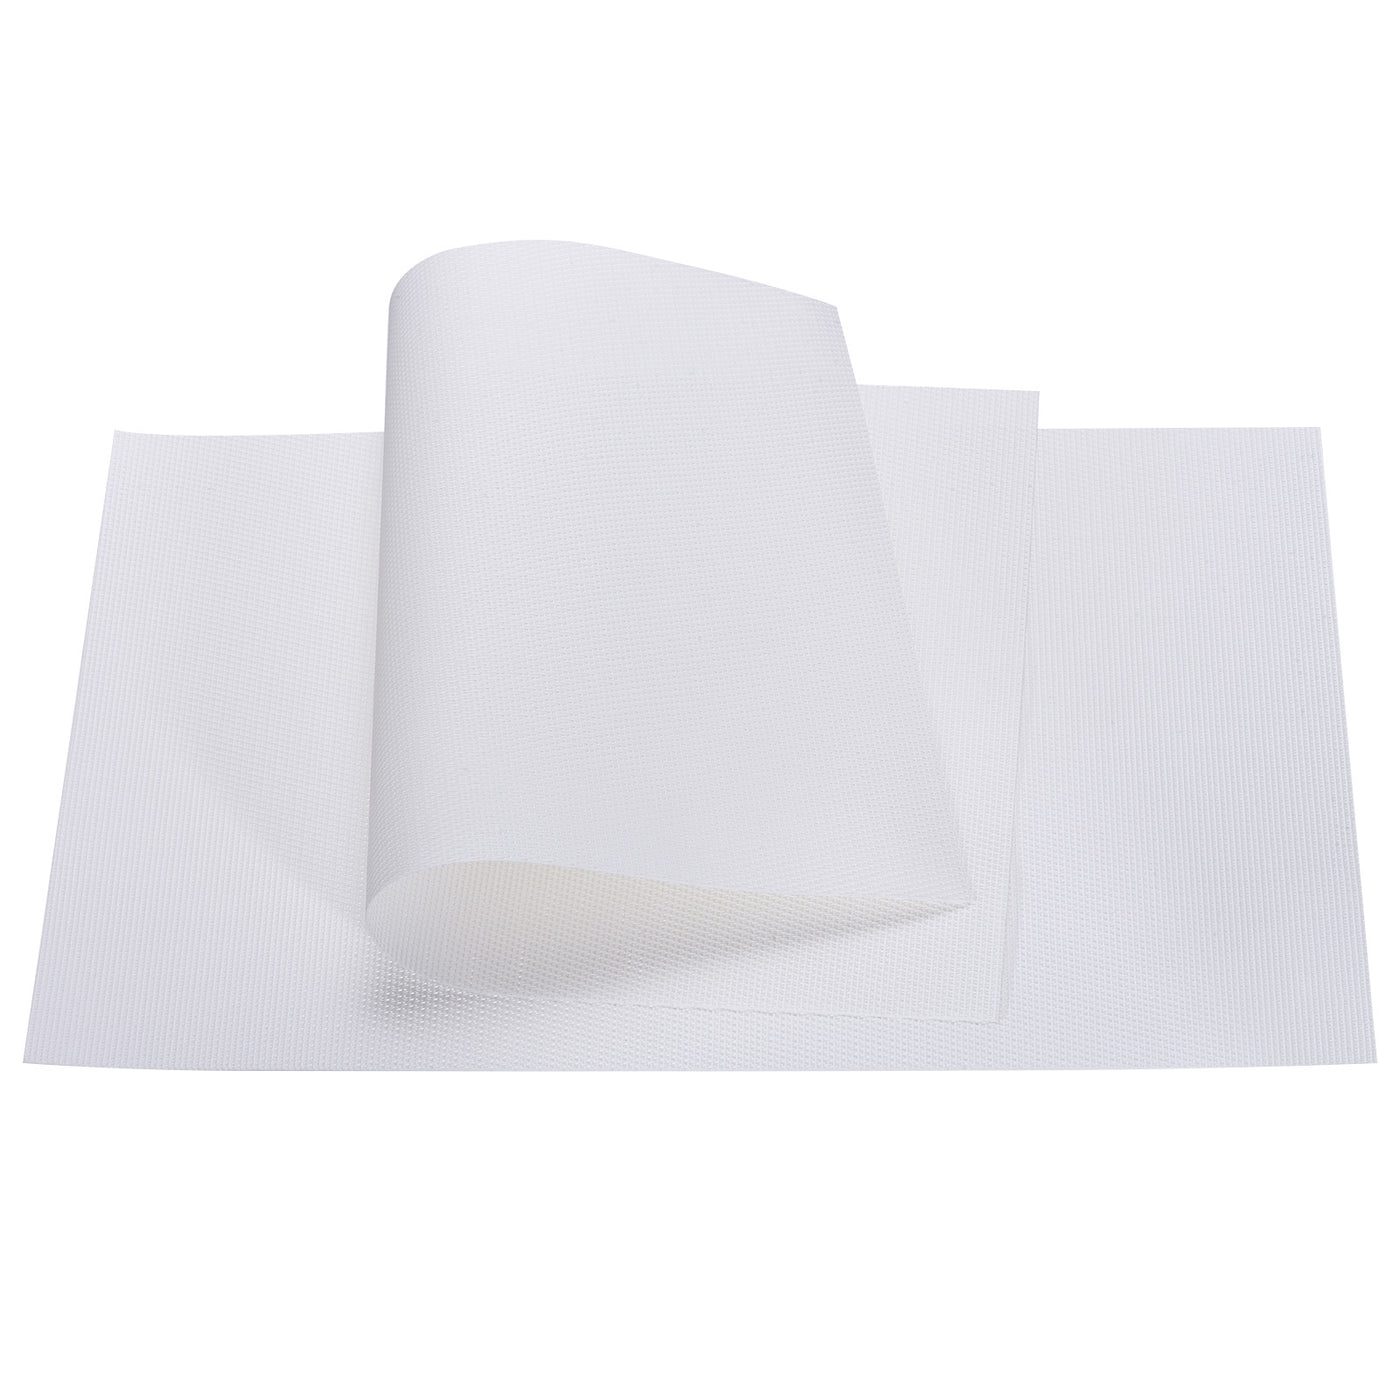 uxcell Uxcell Place Mats 450x300mm 2pcs PVC Table Washable Woven Placemat, White